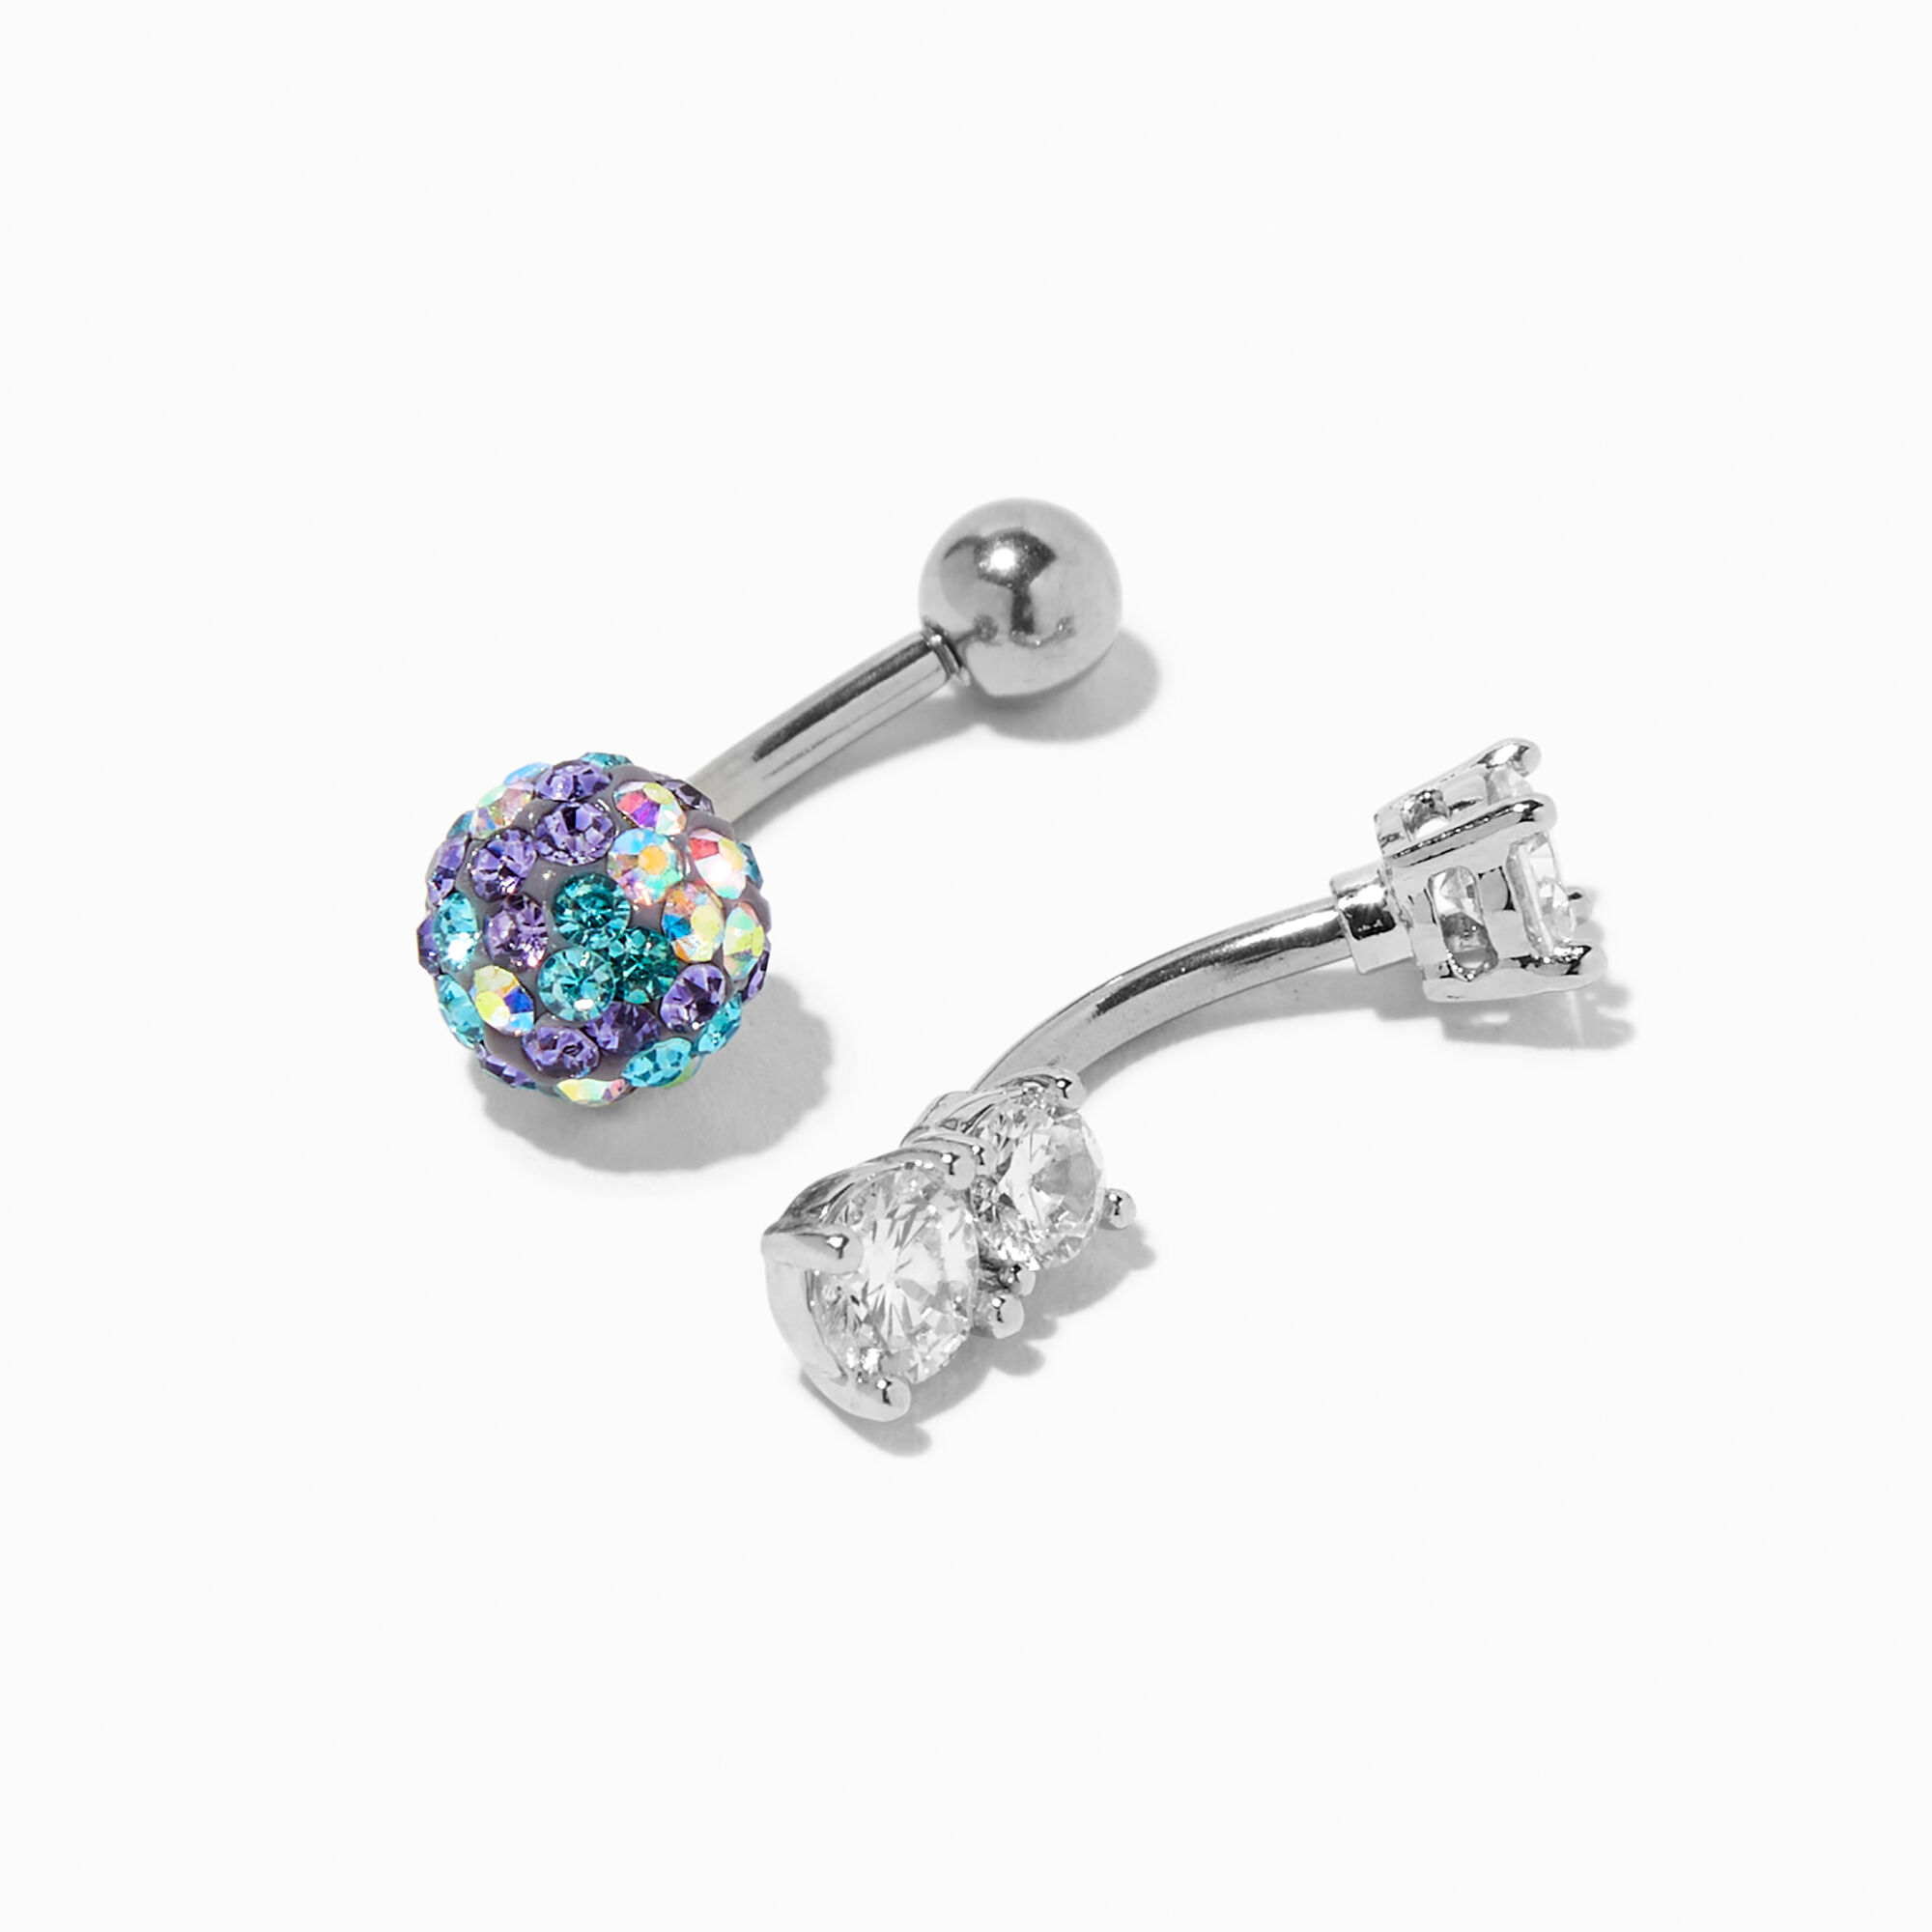 View Claires 14G Crystal Cotton Candy Fireball Belly Rings 2 Pack Silver information